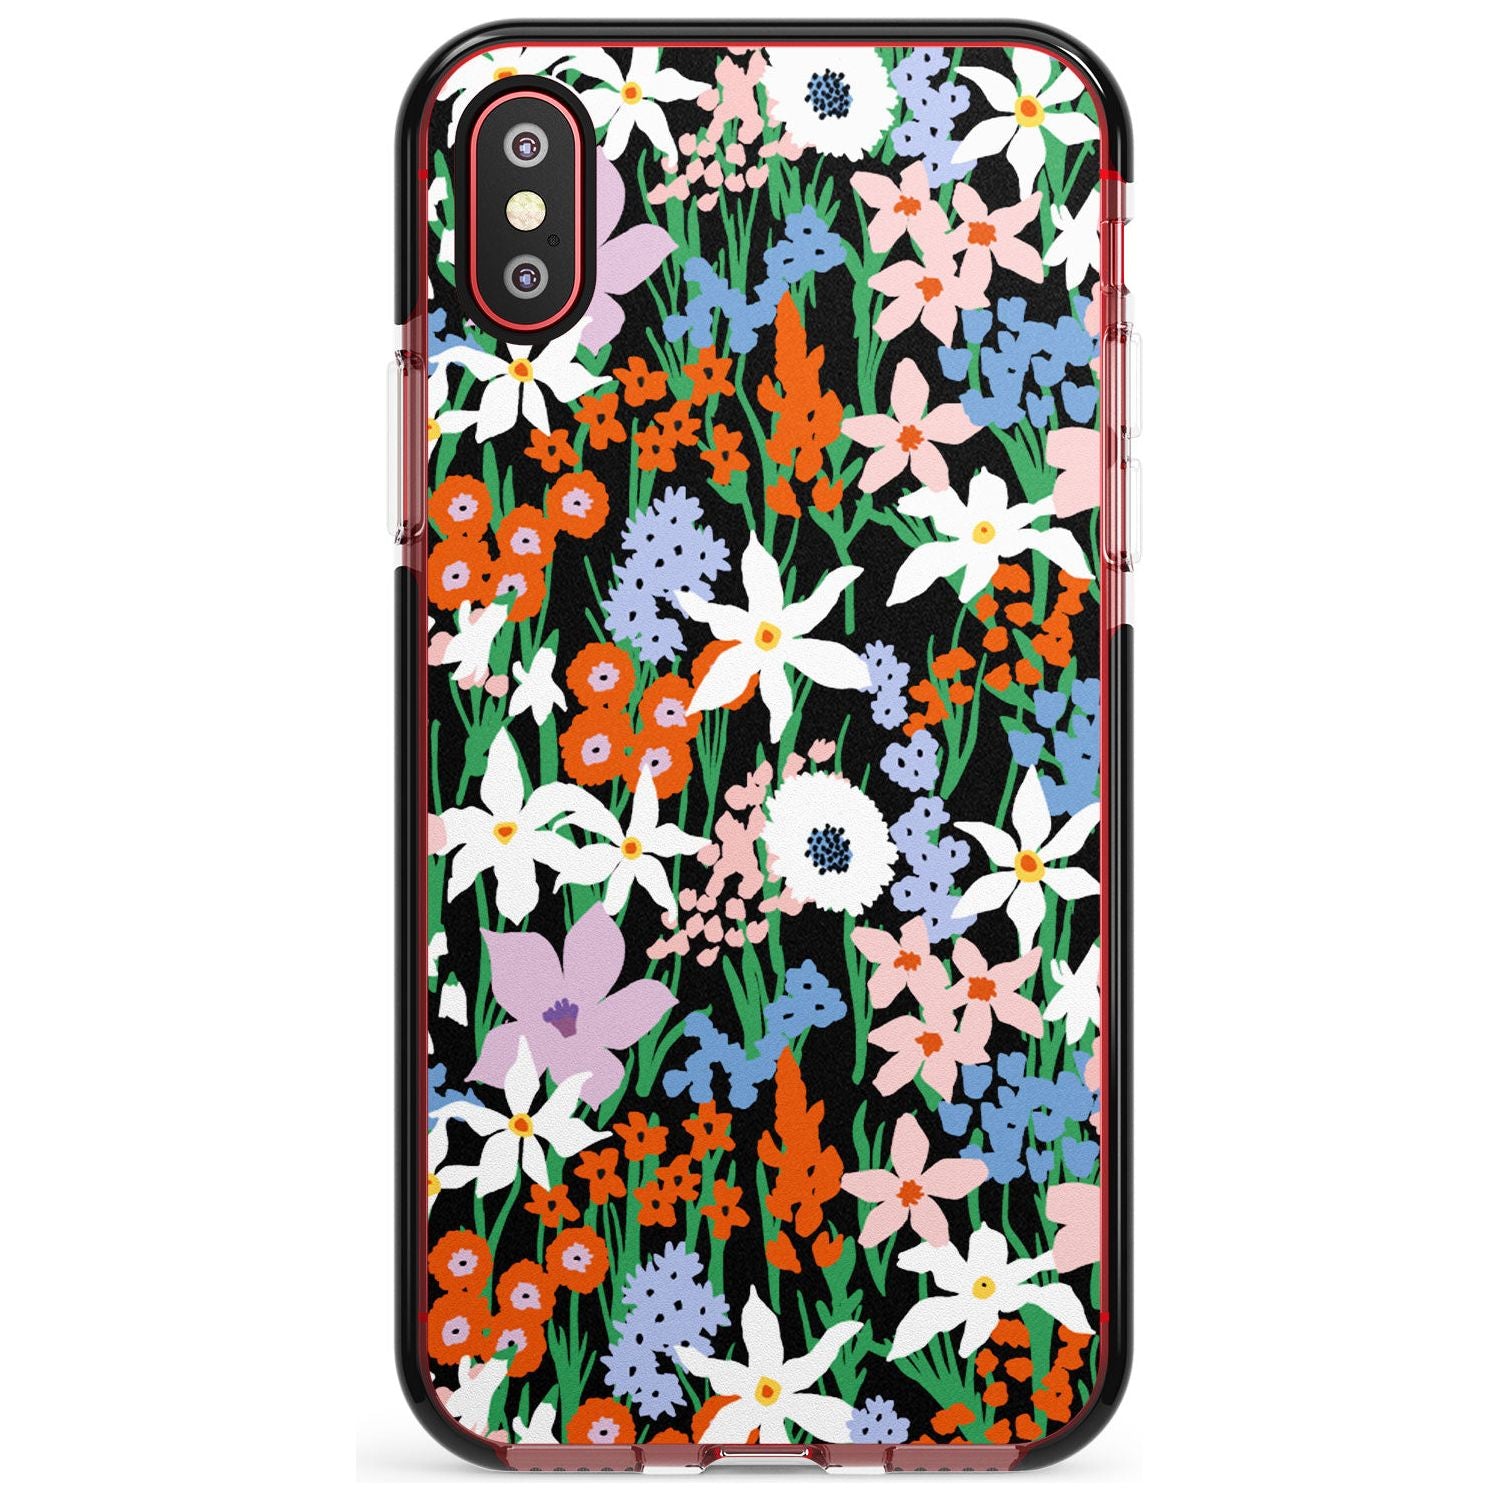 Springtime Meadow: Solid Pink Fade Impact Phone Case for iPhone X XS Max XR